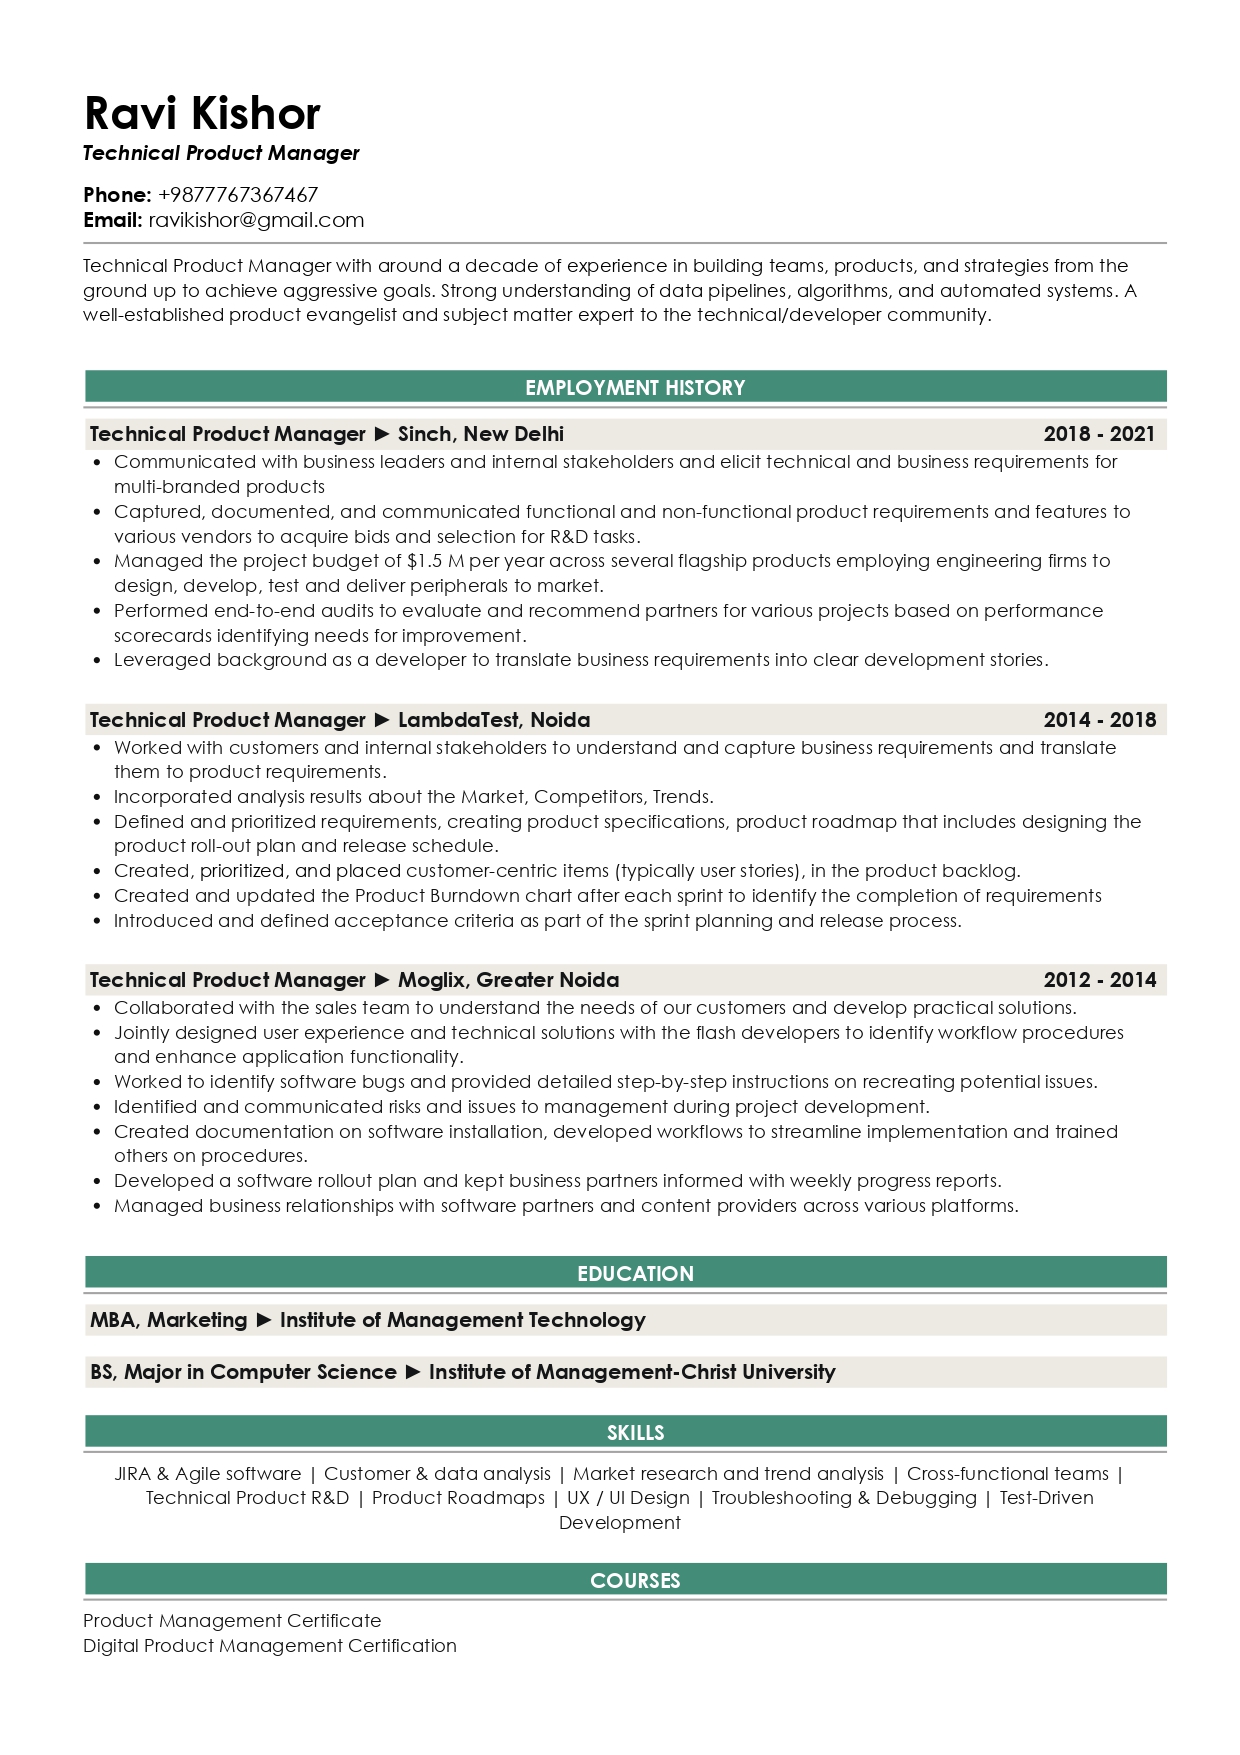 Resume of Technical Product Manager